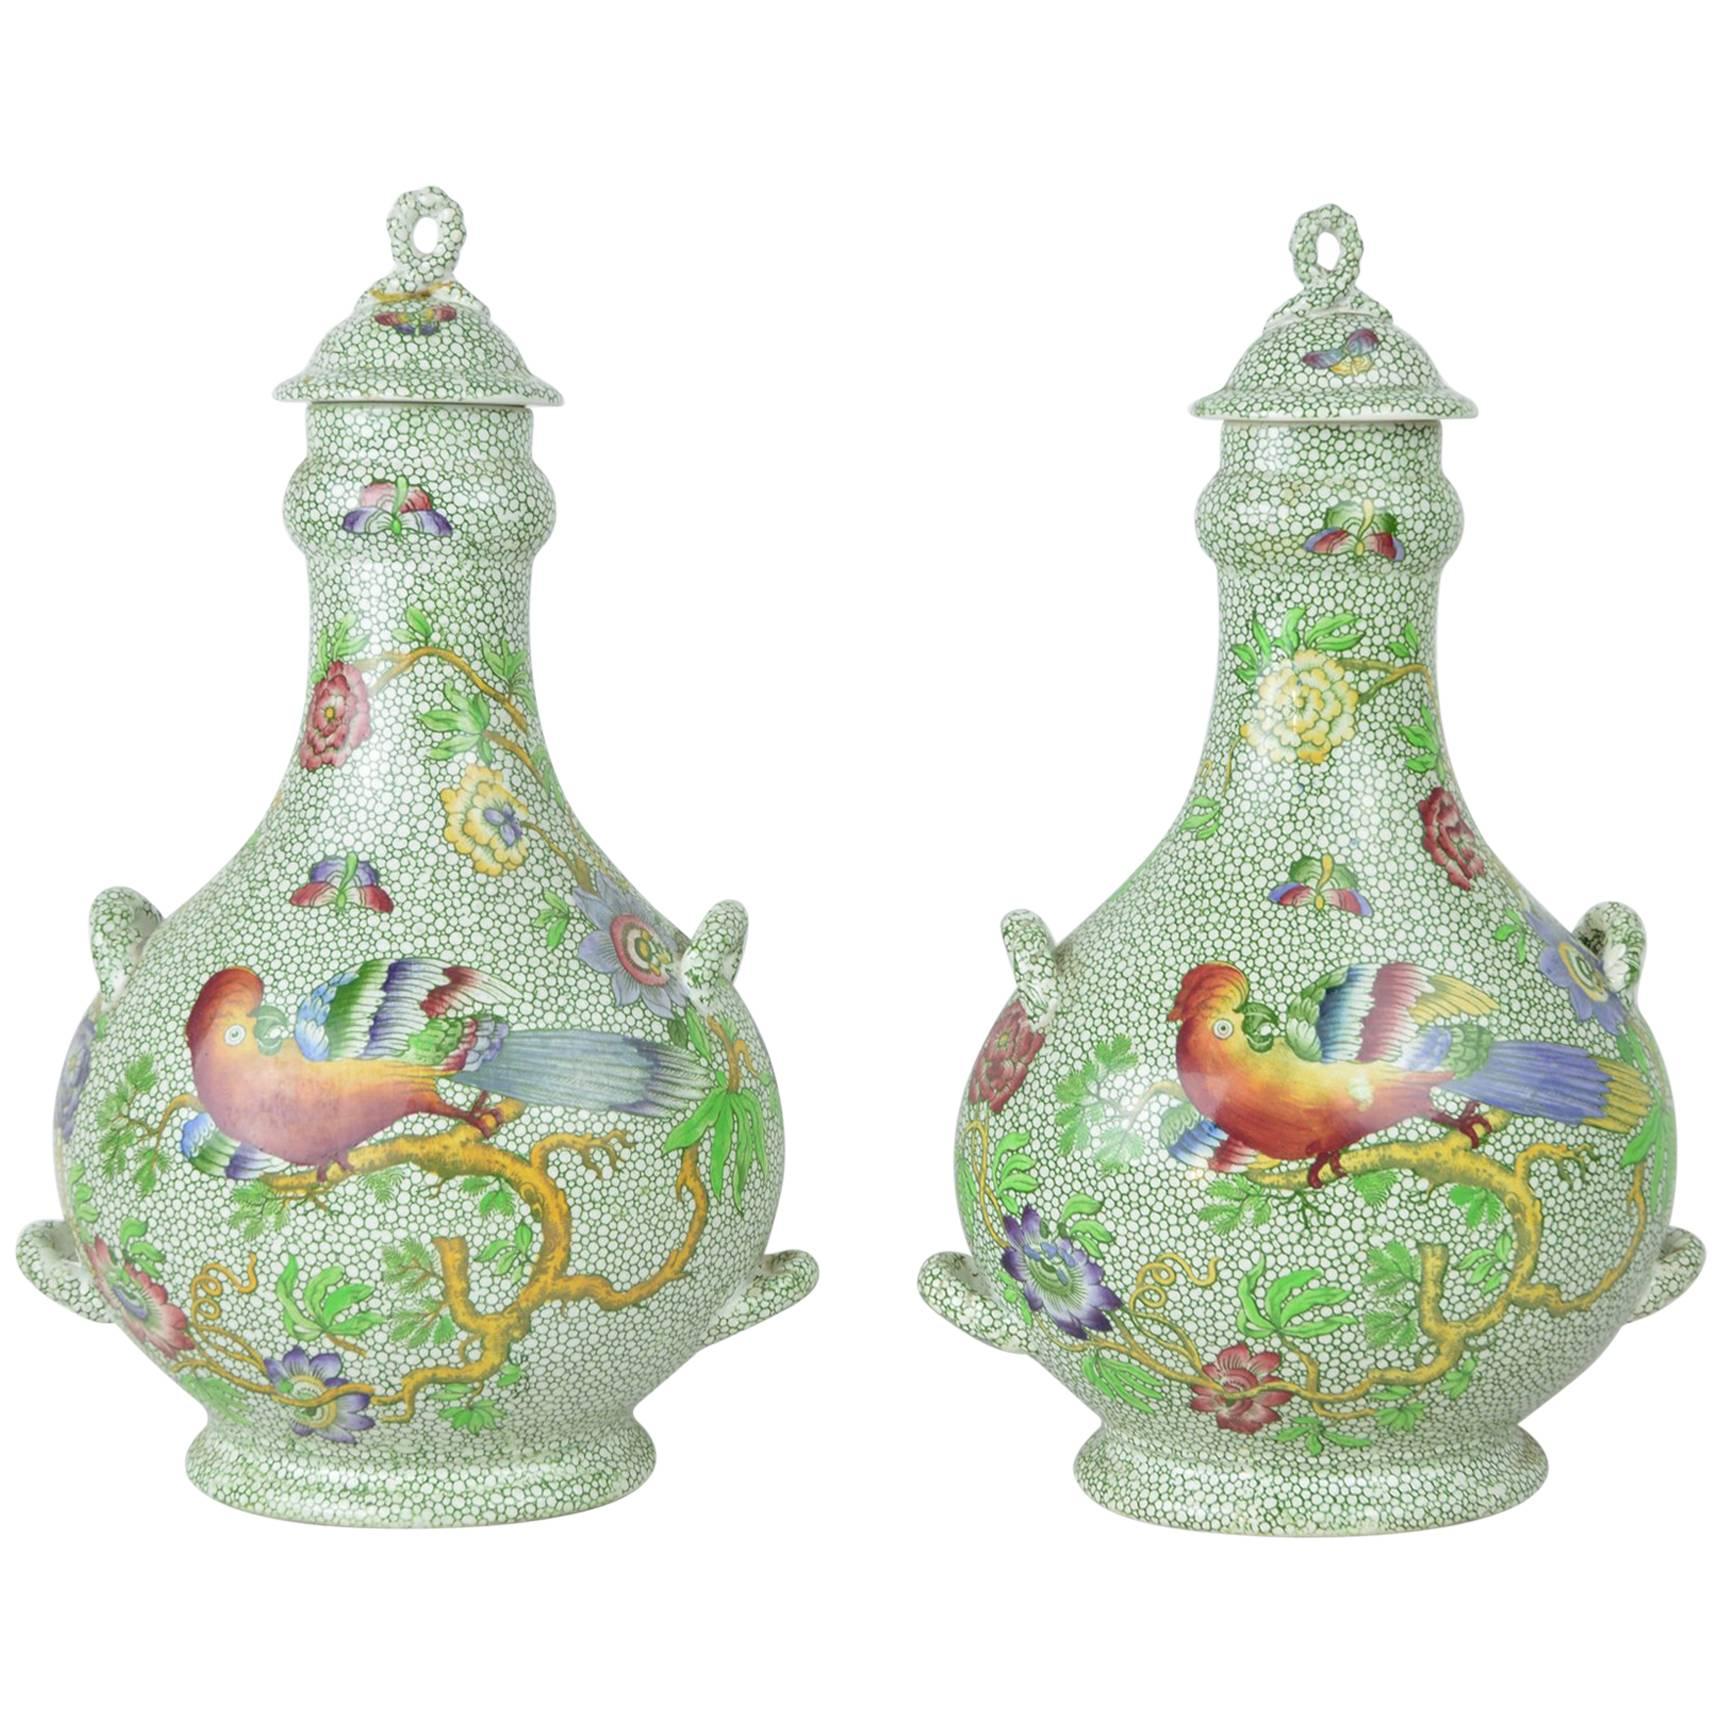 Pair of Antique Copeland Spode Chintz Pattern Chinoiserie Style Cover Vases